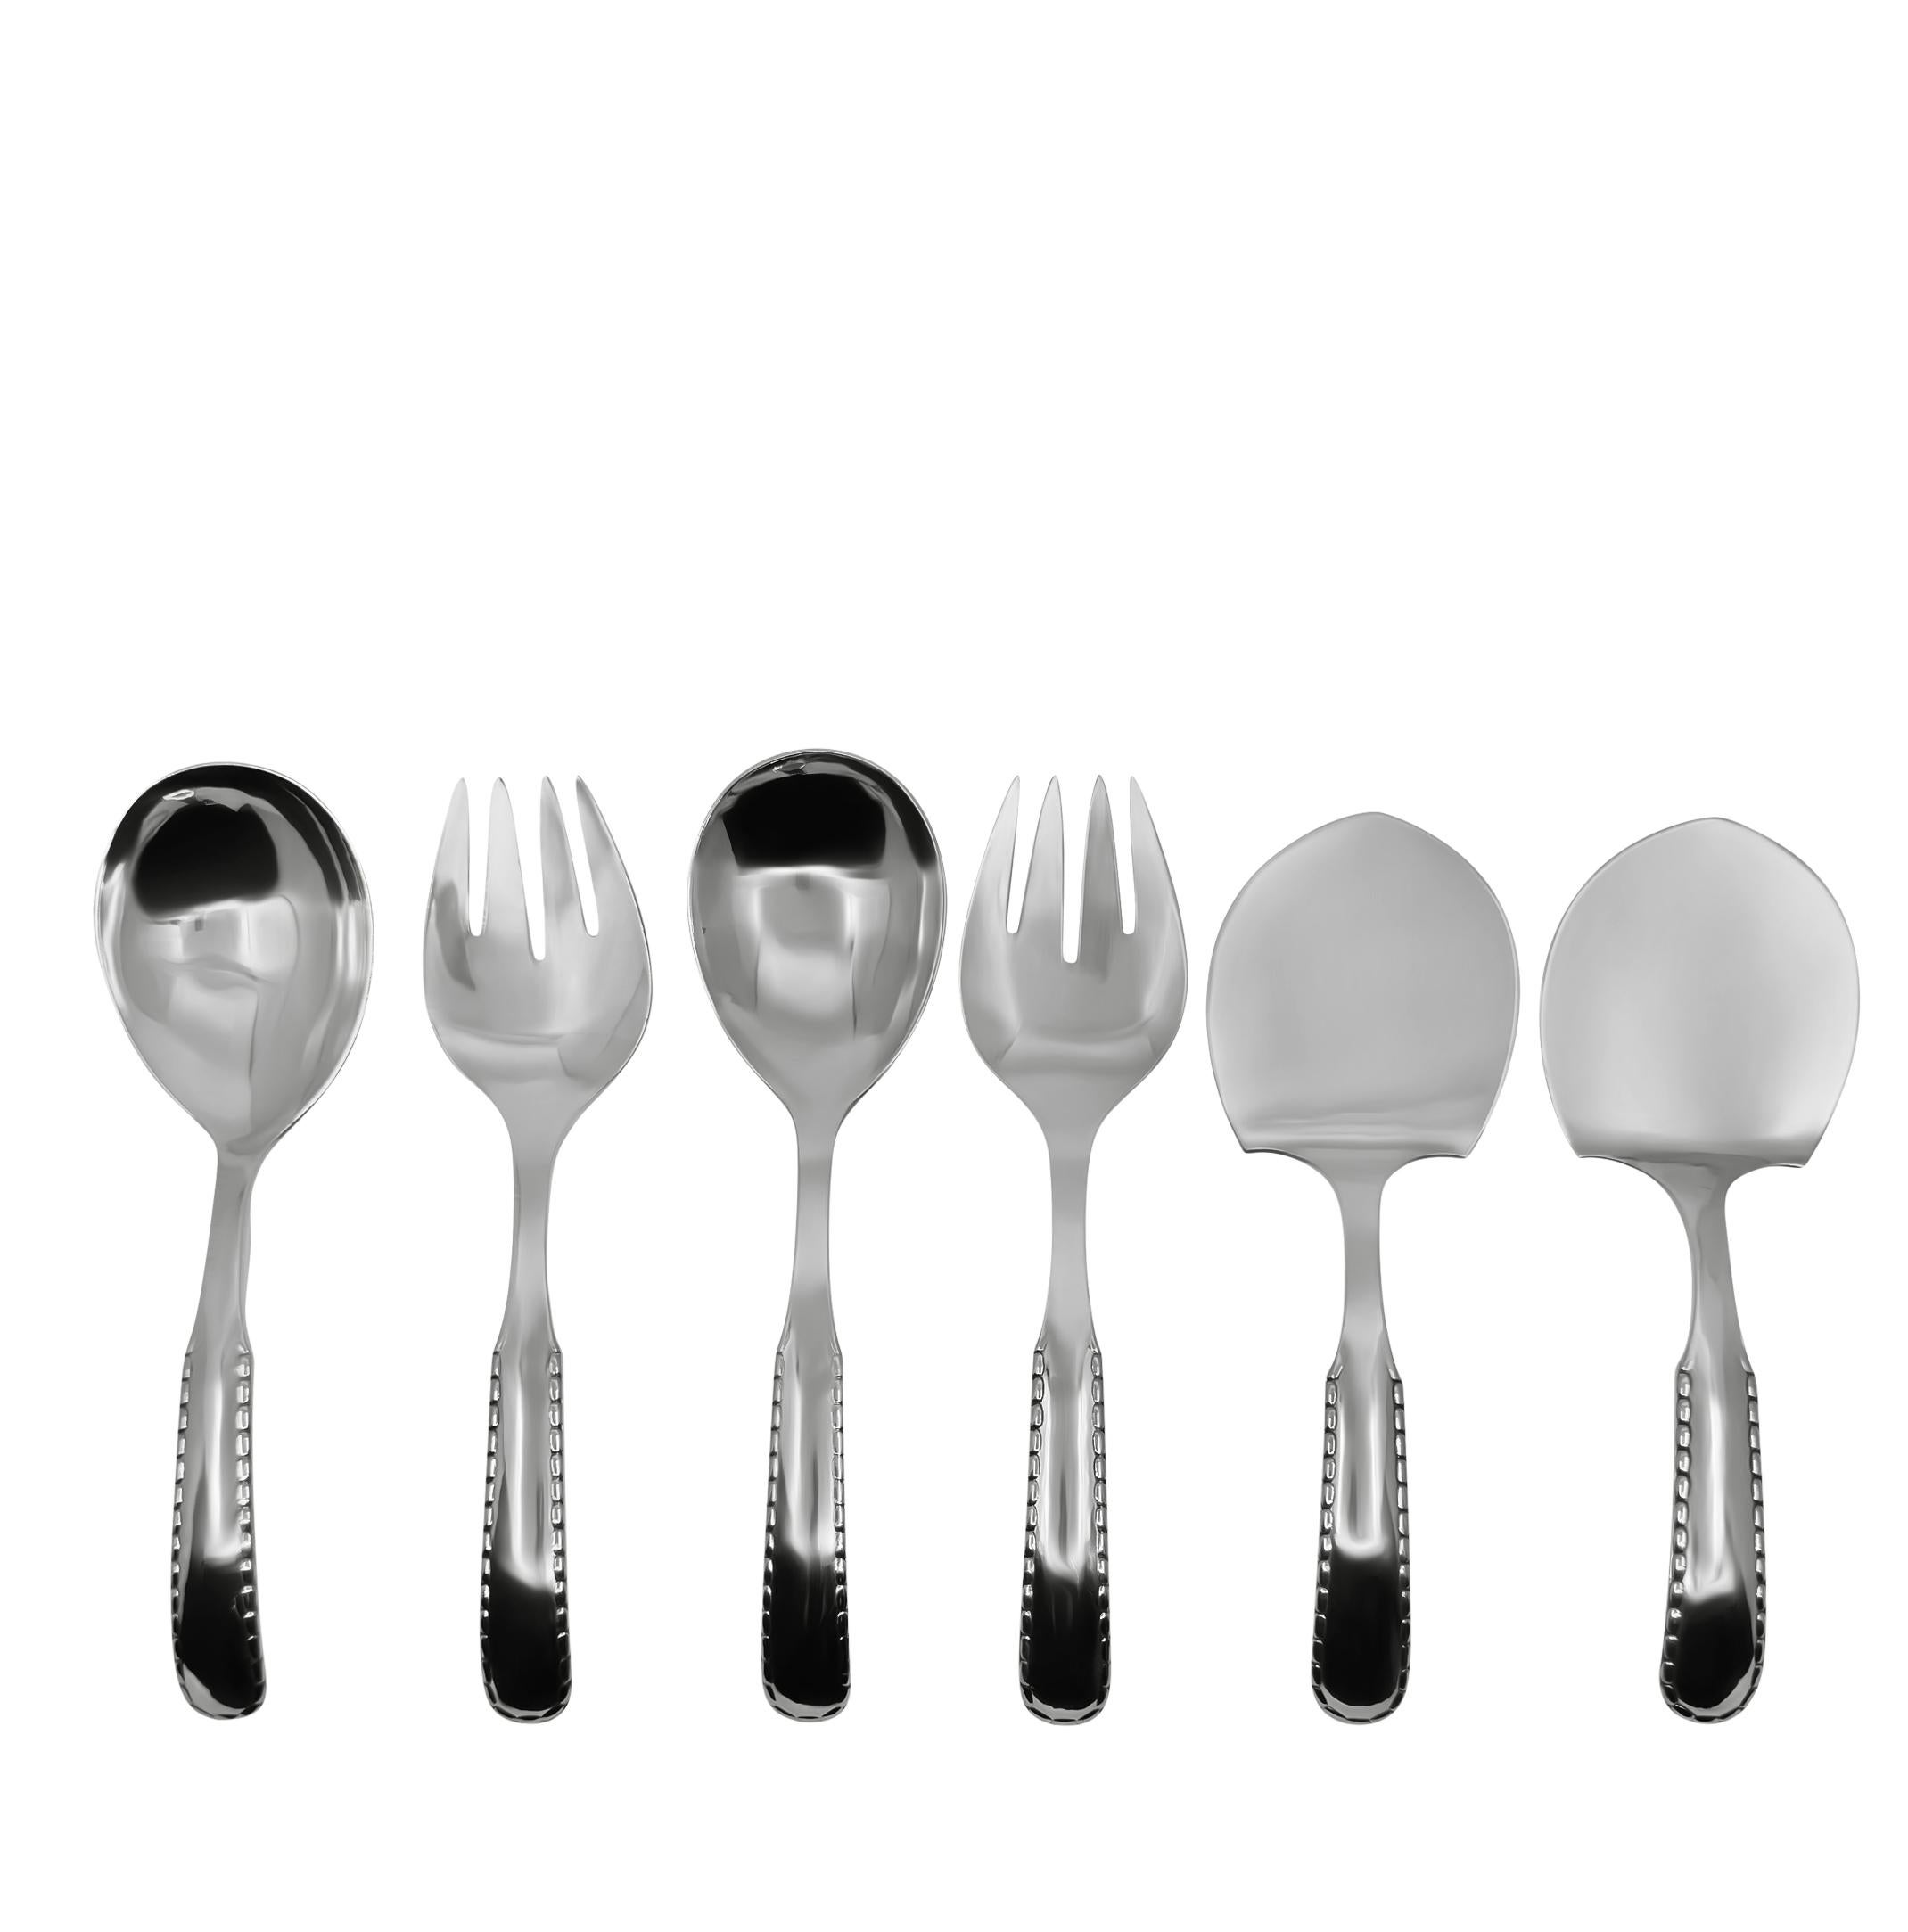 An extensive sterling silverware service for twelve in the Rope/Perle pattern by Georg Jensen. Originally designed in 1916 by Georg Jensen himself, the Rope/Perle pattern is a rare find, particularly in a complete set with numerous rare items. This